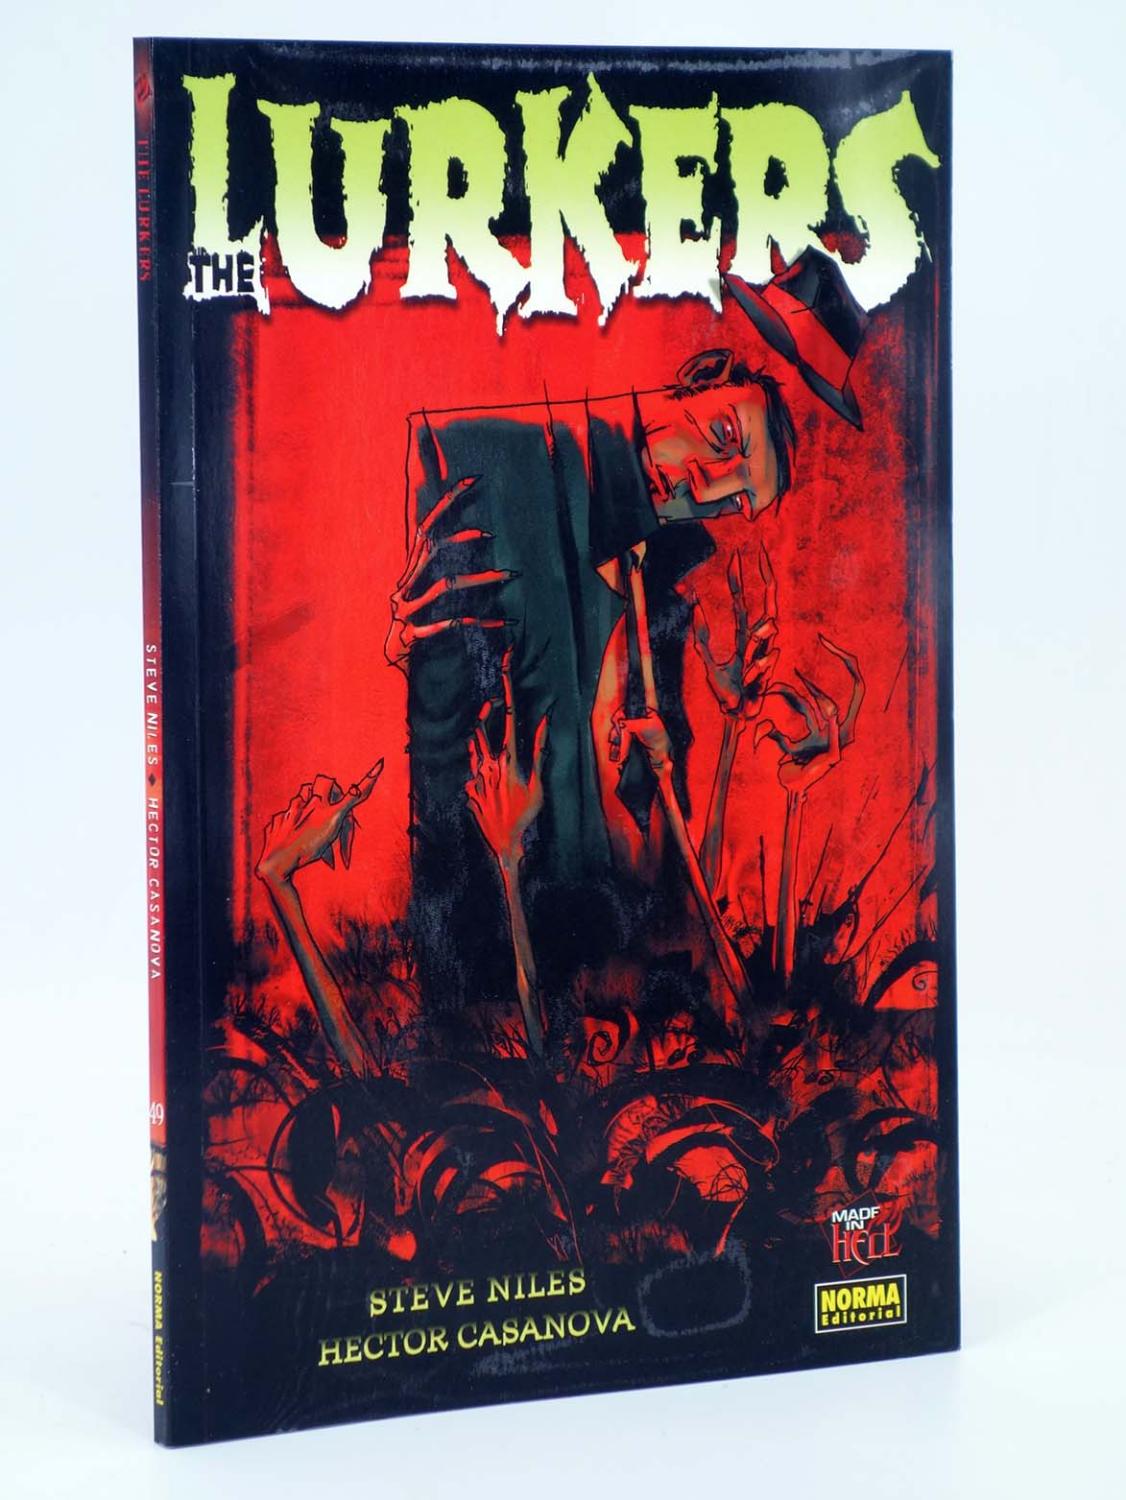 MADE IN HELL 49. THE LURKERS (Steve Niles / Hector Casanova) Norma, 2007. OFRT antes 10E - Steve Niles / Hector Casanova